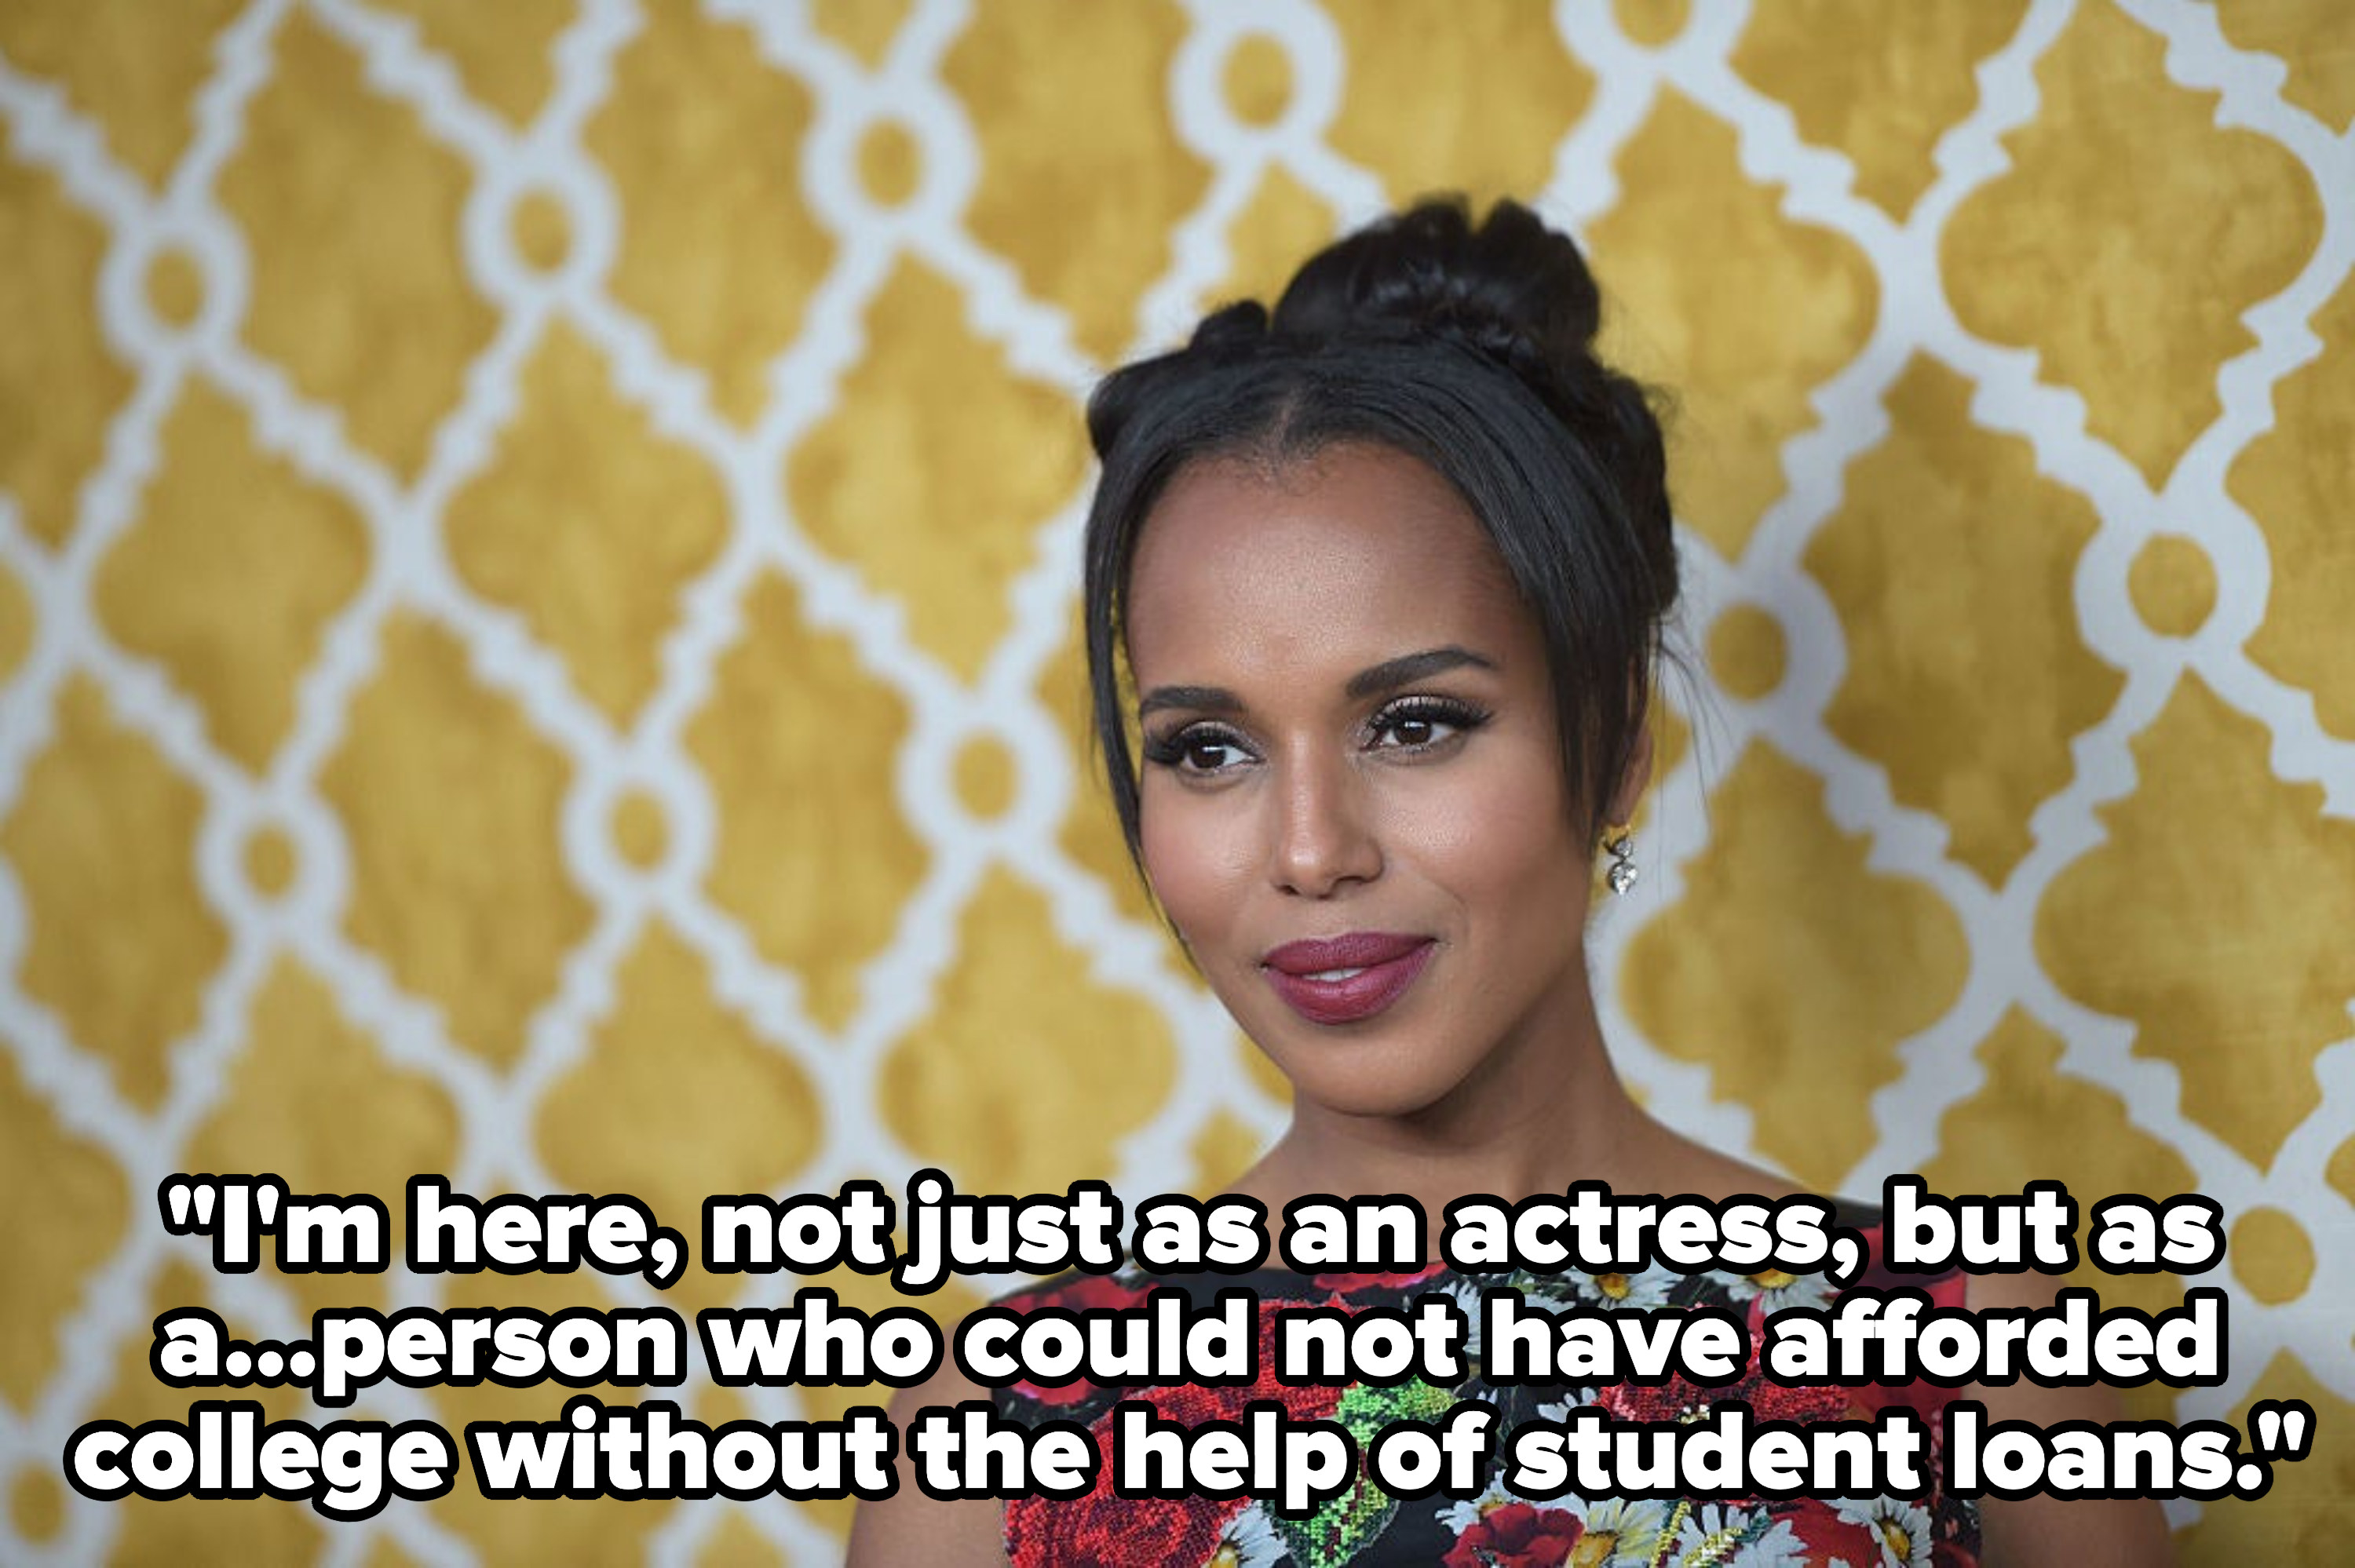 &quot;I&#x27;m here, not just as an actress, but as a person who could not have afforded college without the help of student loans&quot; 